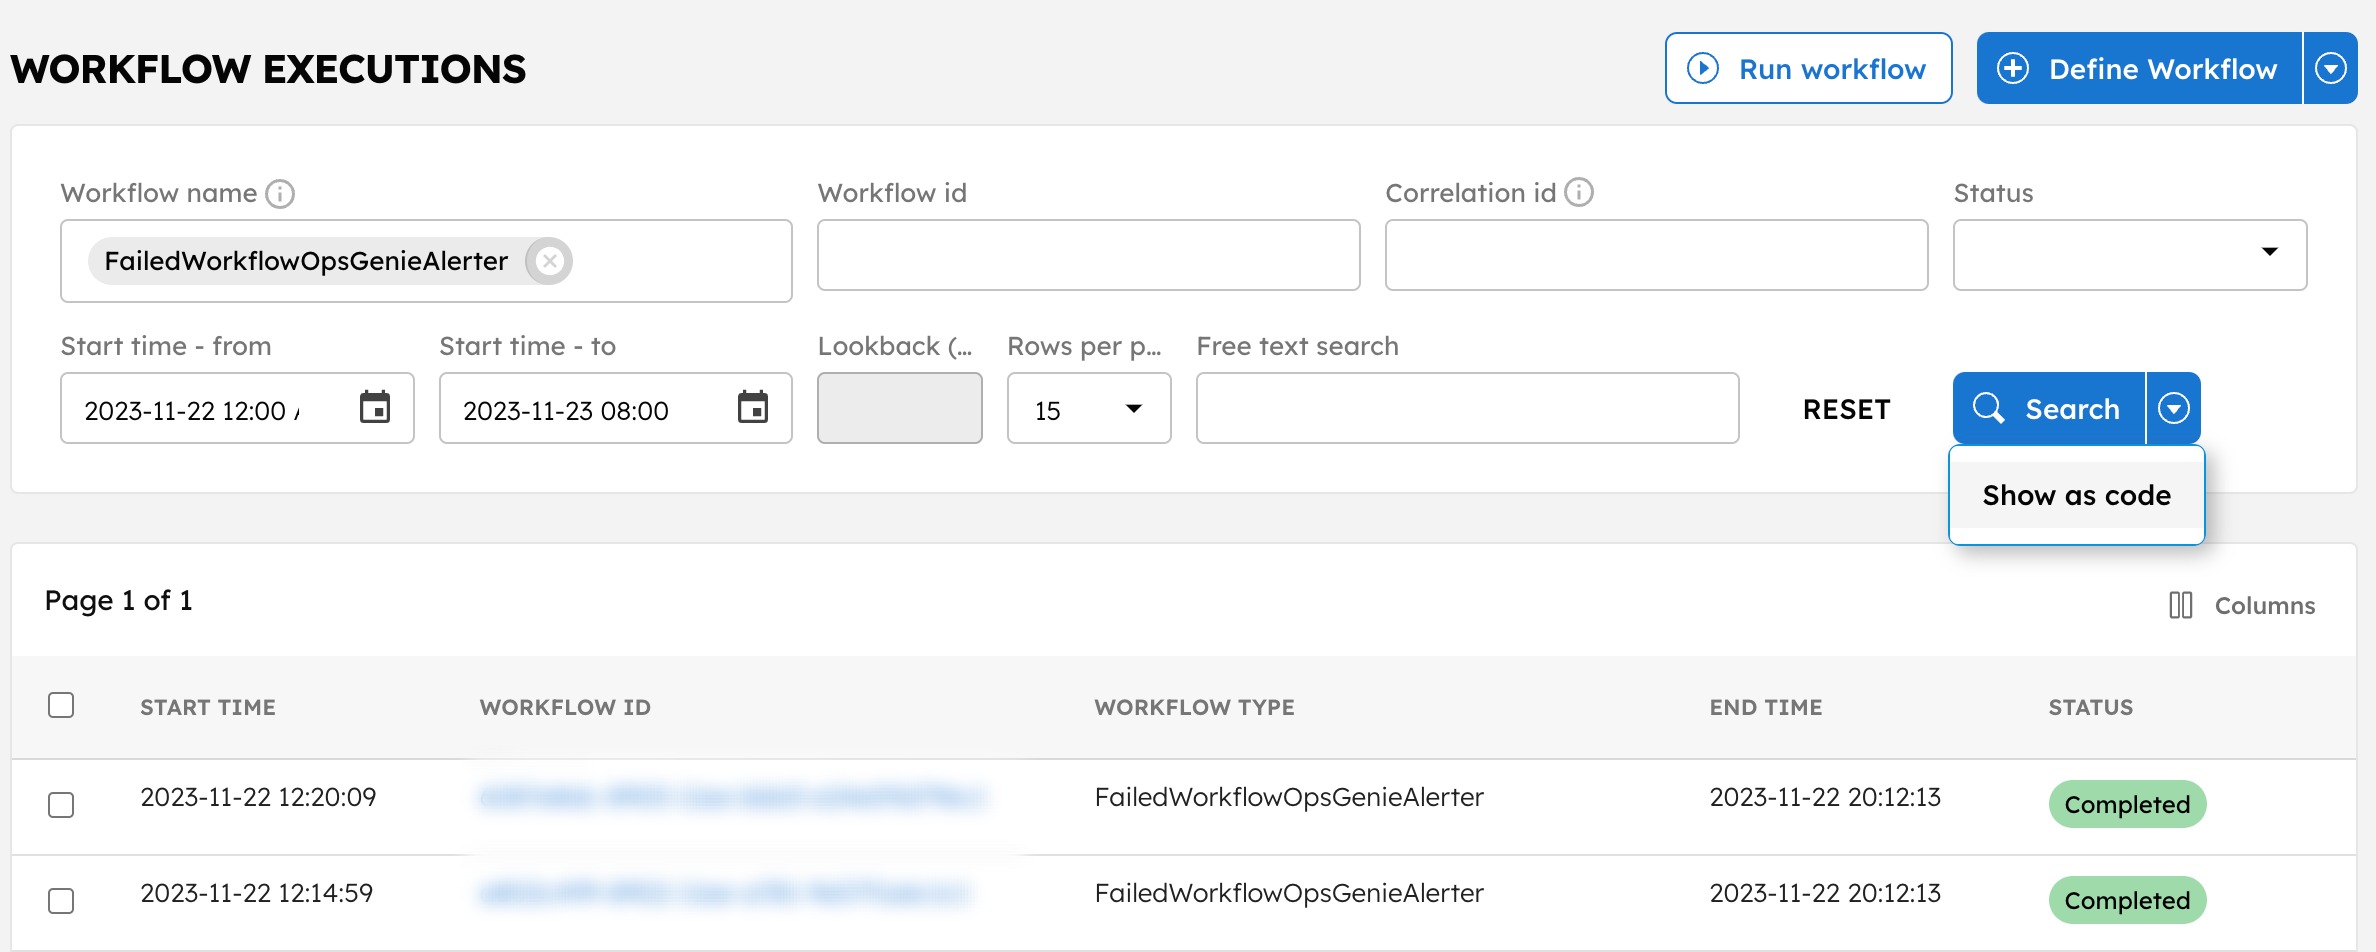 Show as code option in Workflow Search